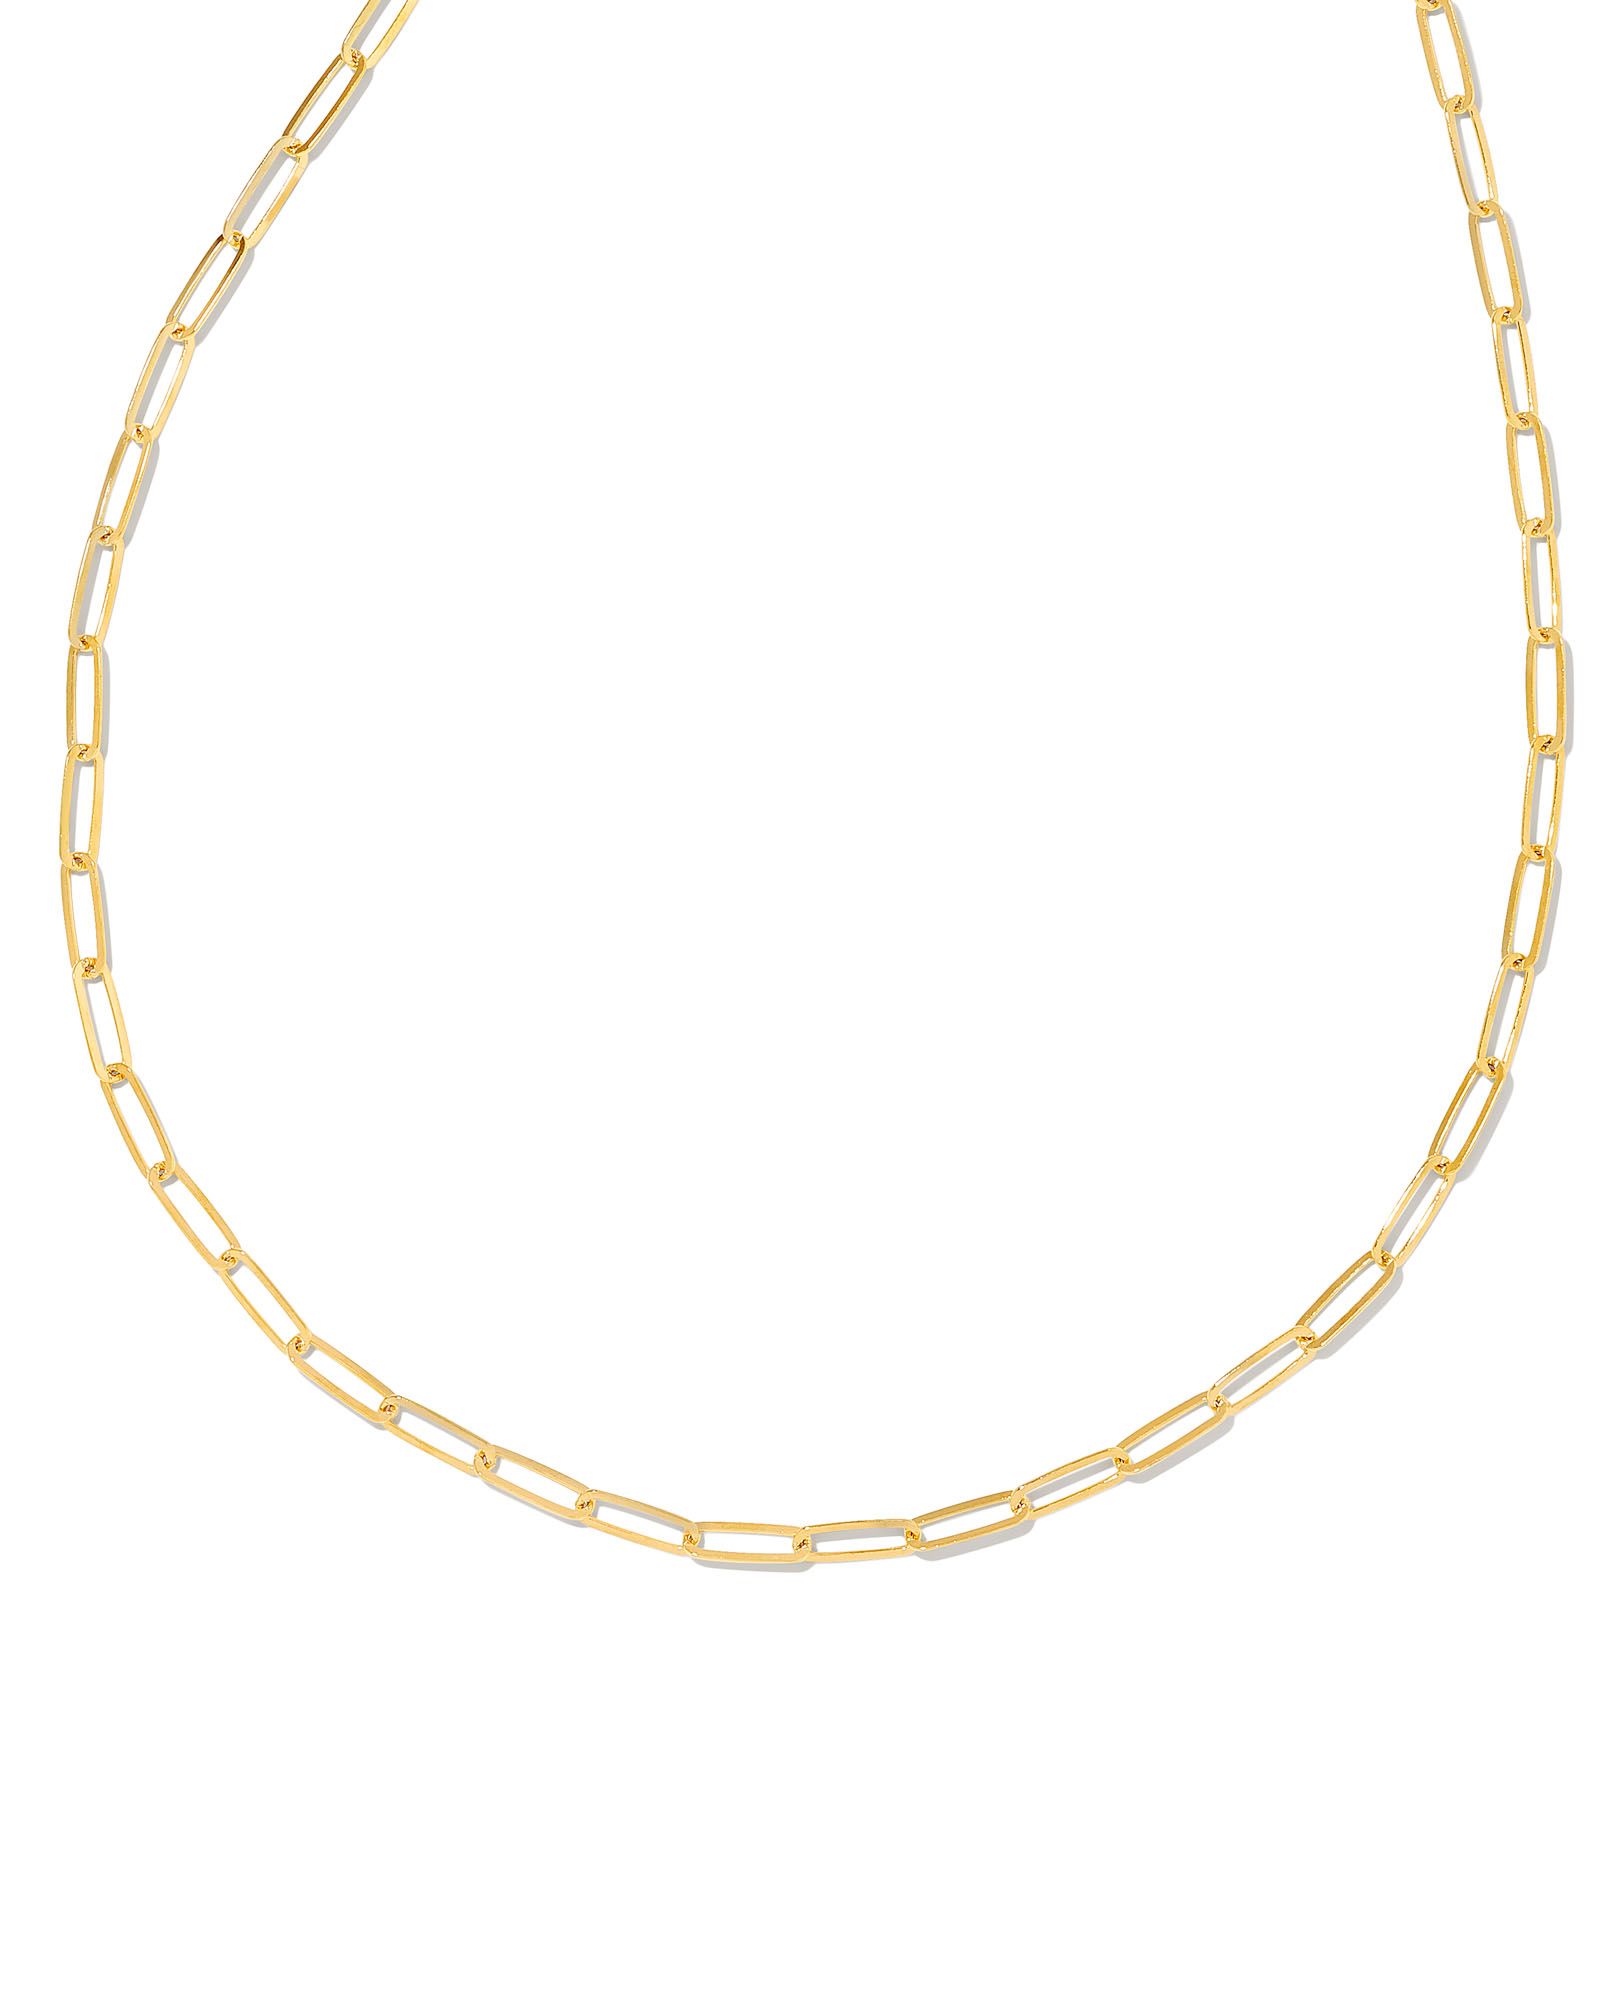 Large Paperclip Chain Necklace in 18k Yellow Gold Vermeil | Kendra Scott | Kendra Scott